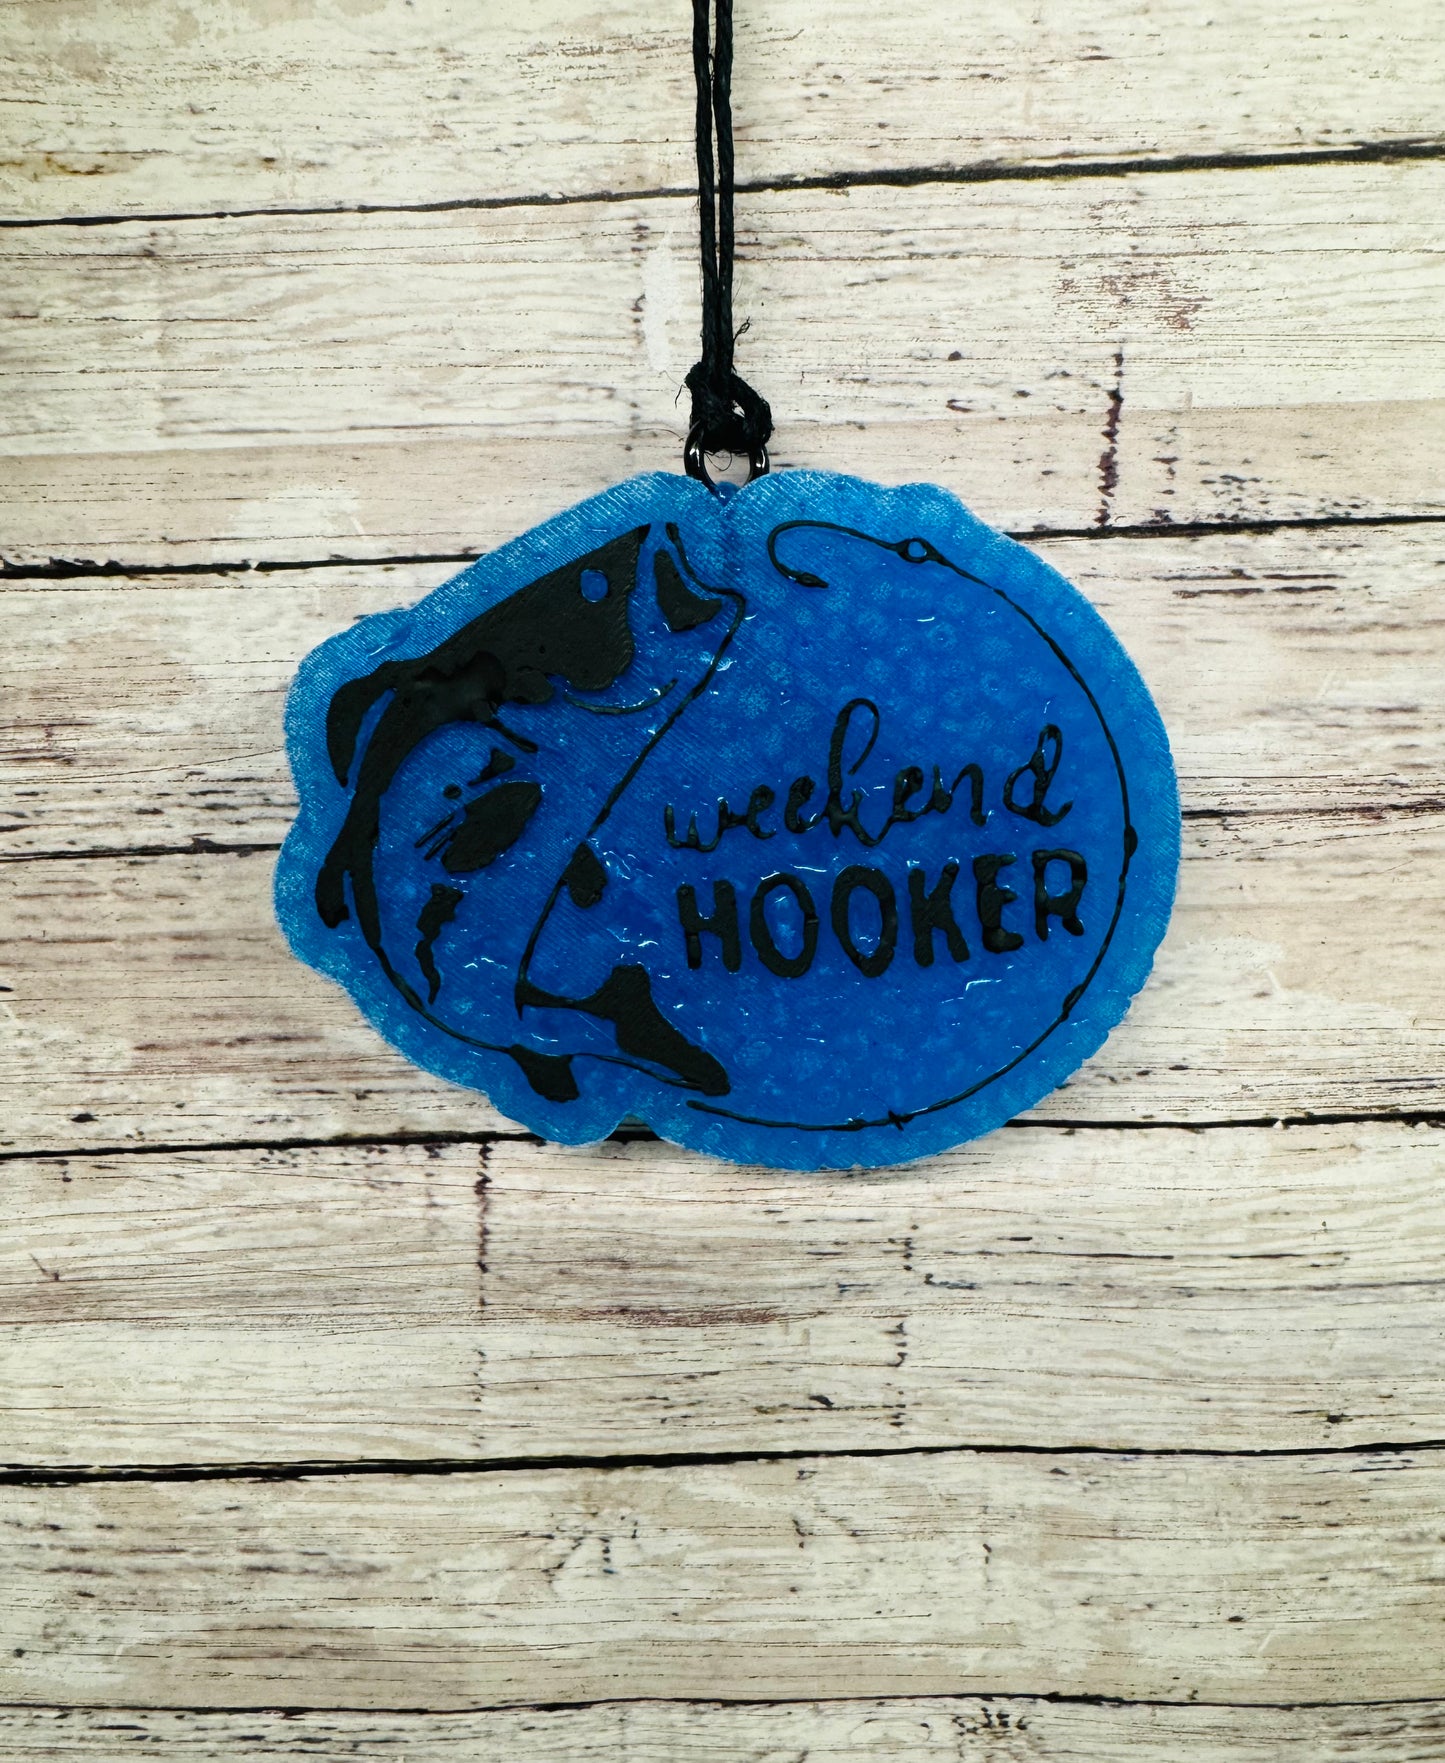 RTS- Fish- Weekend Hooker- Black Ice Scent